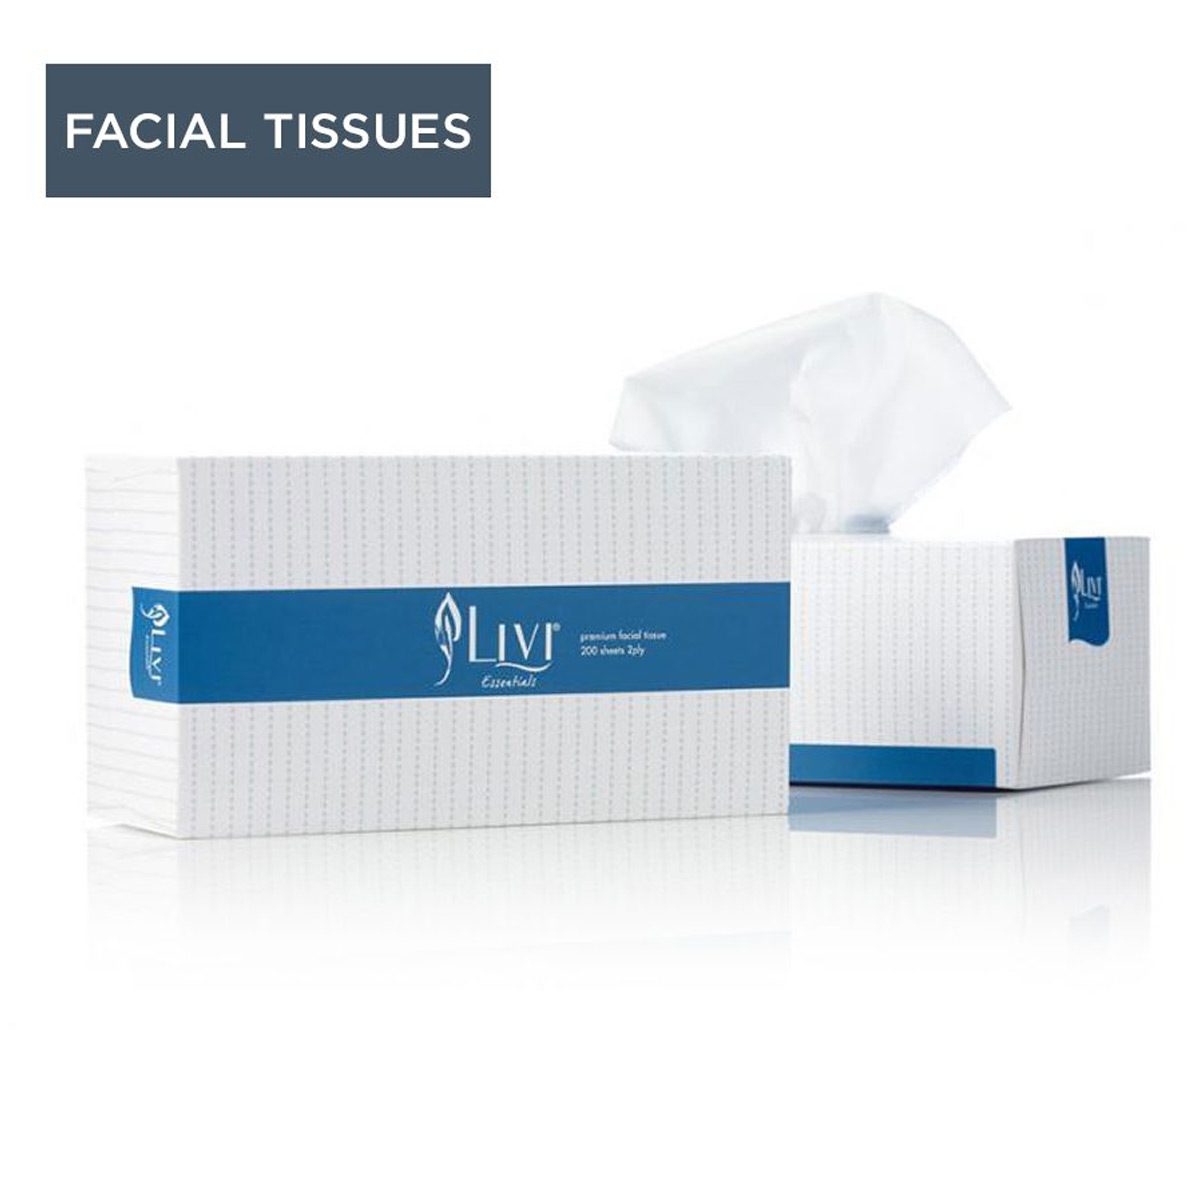 paper-products-facial-tissues-livi-essentials-facial-tissues-200s-x-40-packs-soft-strong-affordable-perfect-high-frequency-use-hypoallergenic-gentle-suitable-sensitive-skin-vjs-distributors-1302